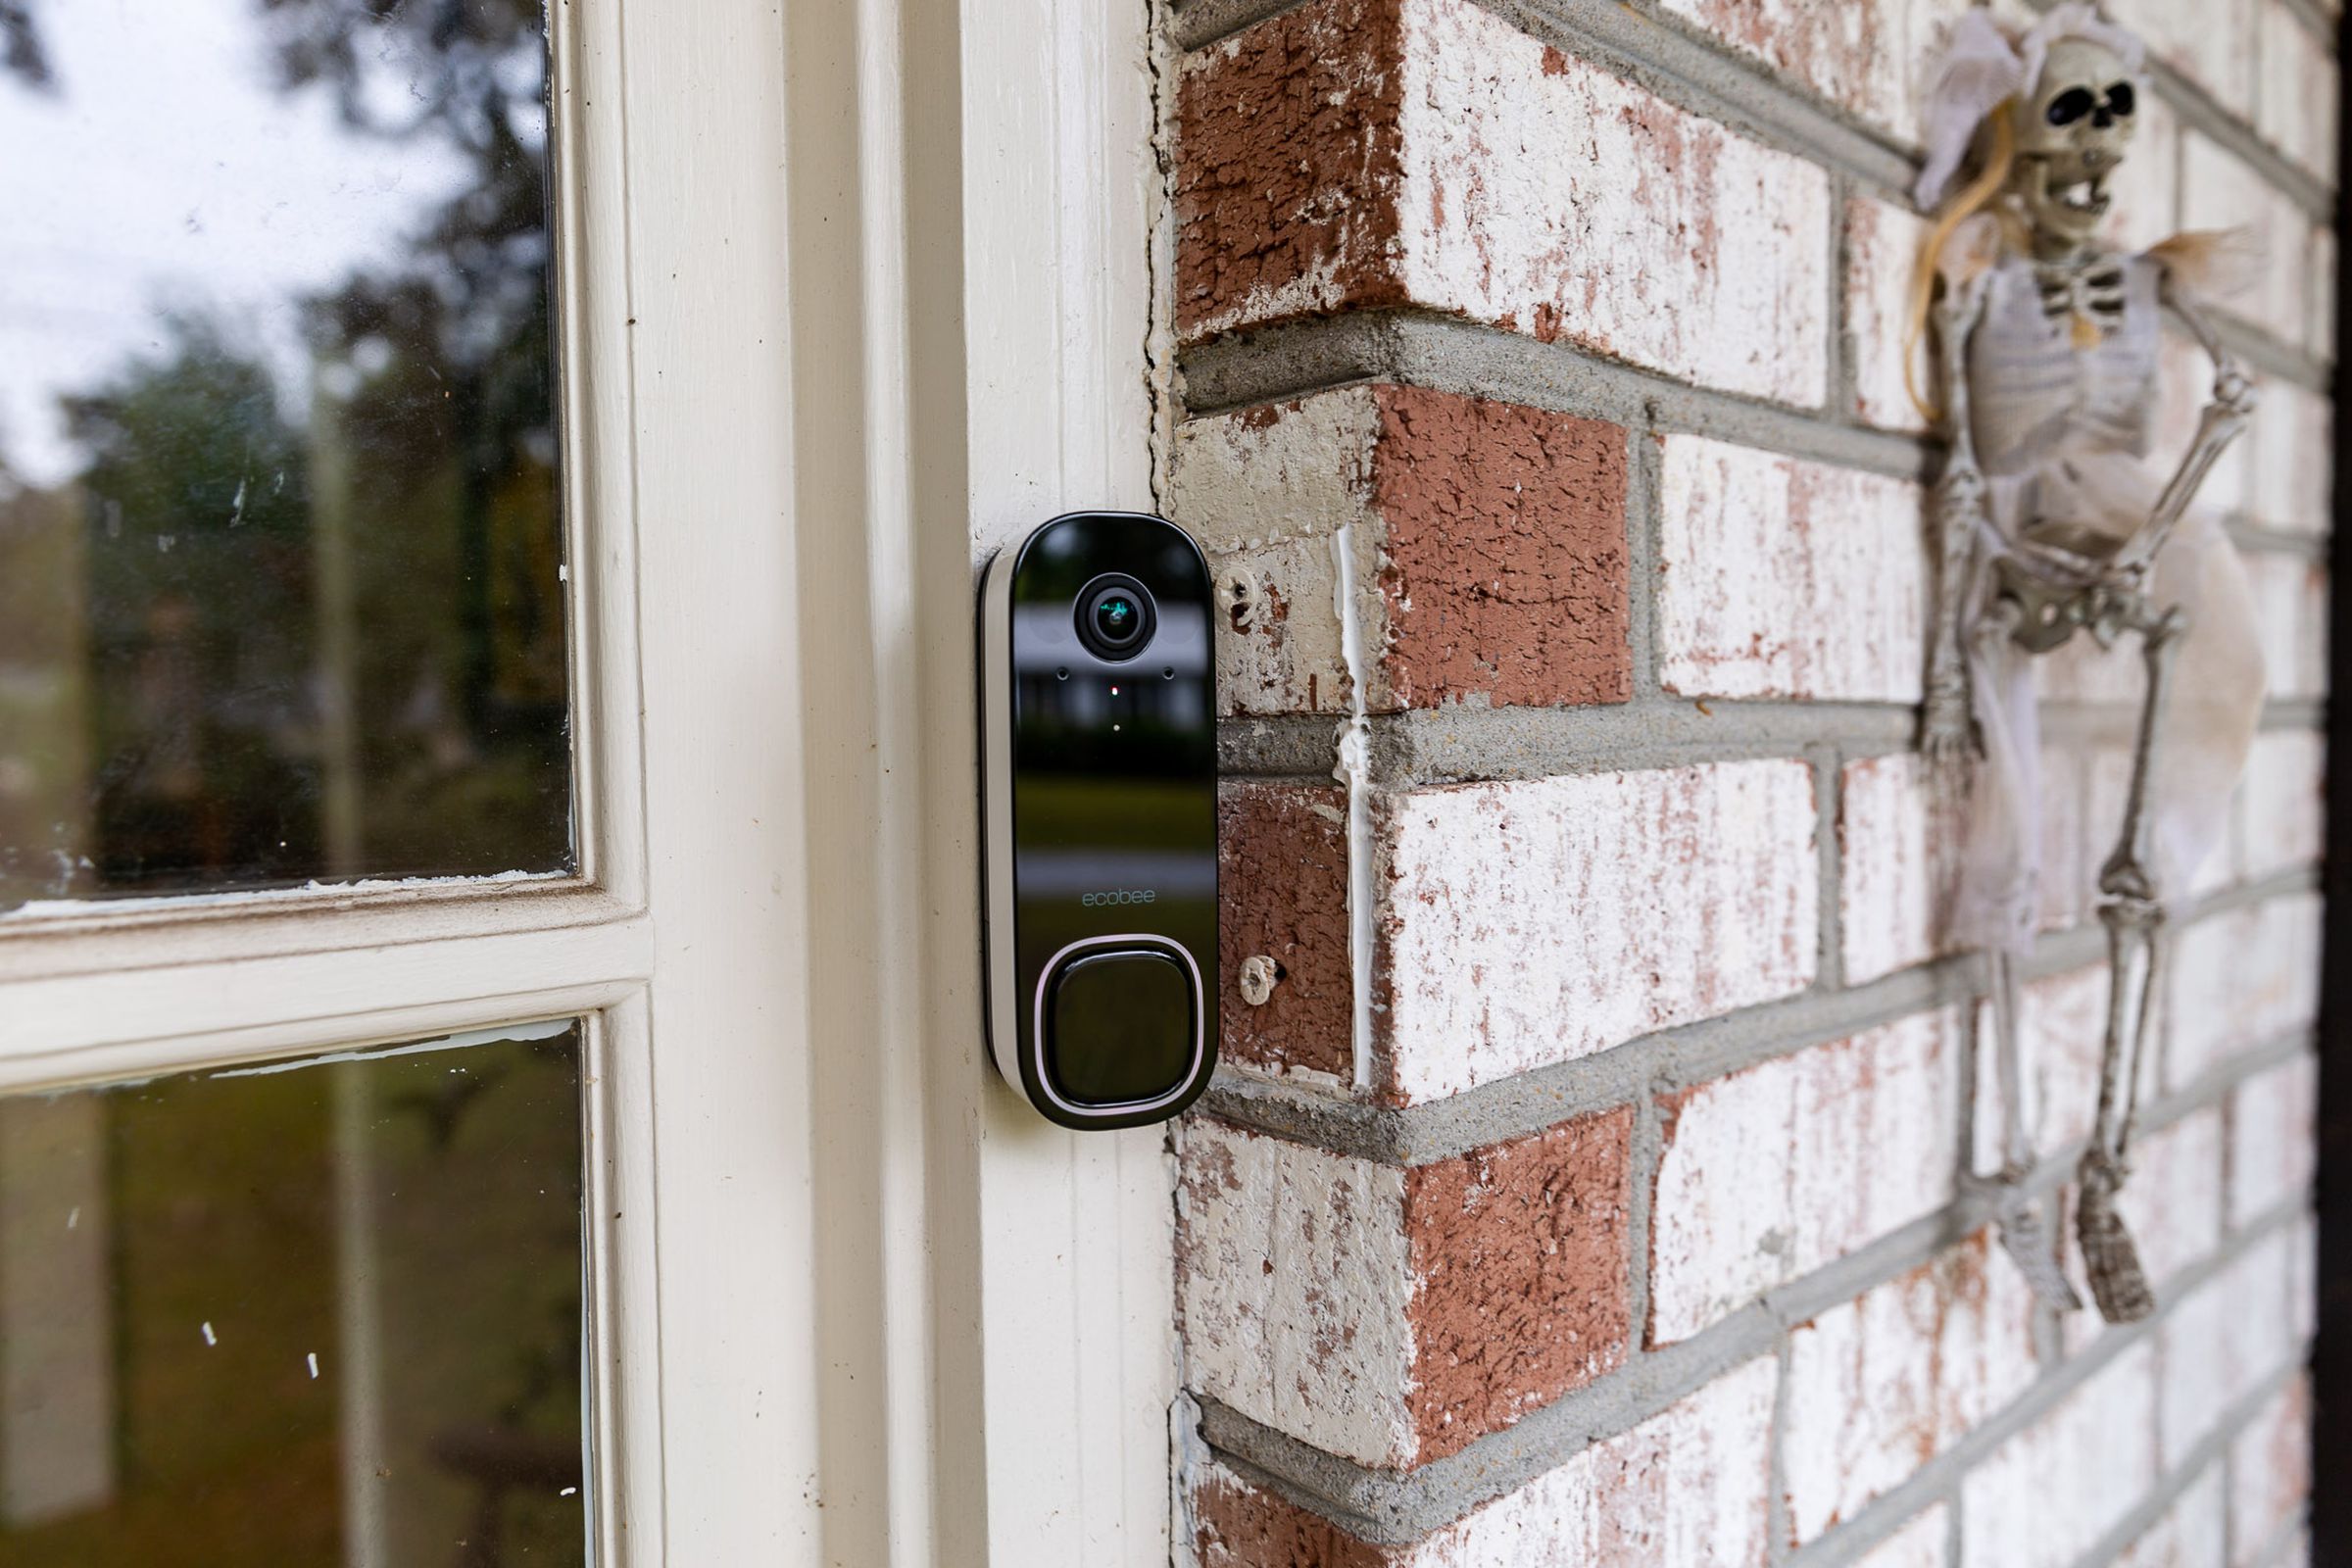 The Ecobee Smart Doorbell Camera is large for a wired doorbell, with a black glass front and a white trim.